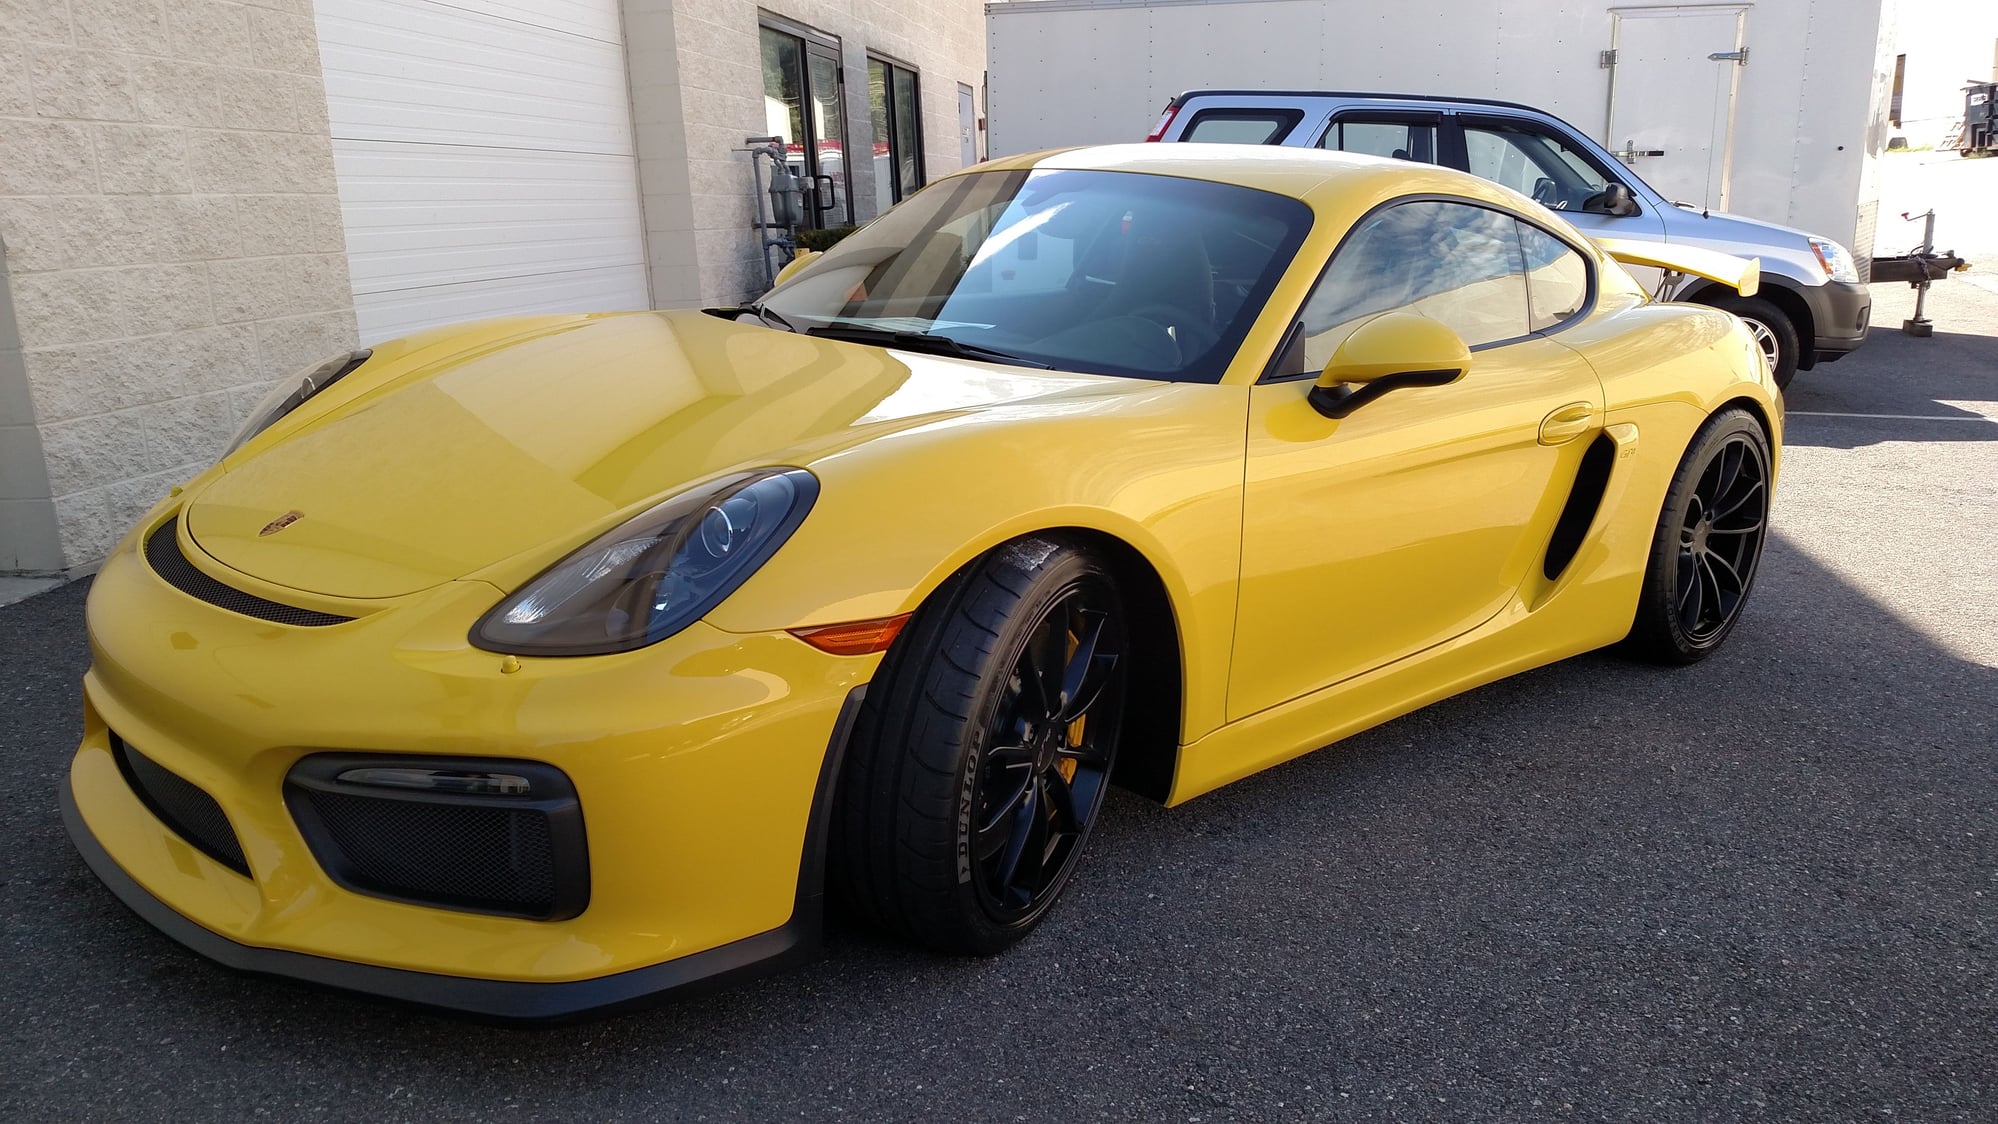 2016 Porsche Cayman GT4 - 2016 Cayman GT4 with 11 miles for sale. Still has transport tape on pedals. - New - VIN WPOAC2A87GK192687 - 11 Miles - 6 cyl - 2WD - Manual - Coupe - Yellow - Mendham, NJ 0794, United States